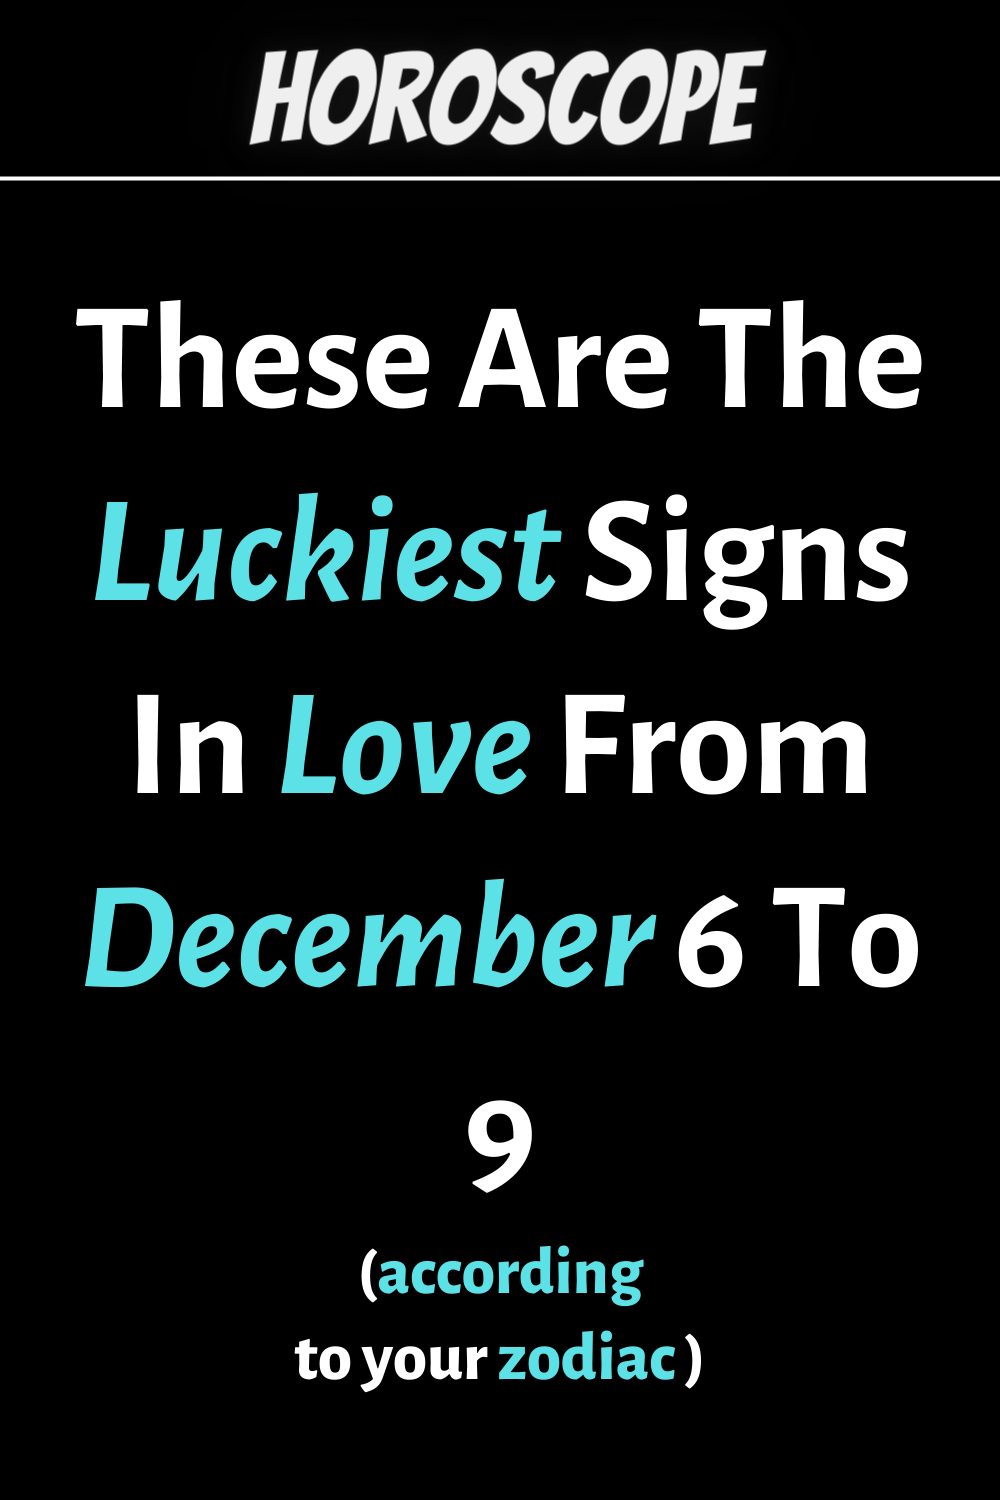 These Are The Luckiest Signs In Love From December 6 To 9 According To Eastern Astrology